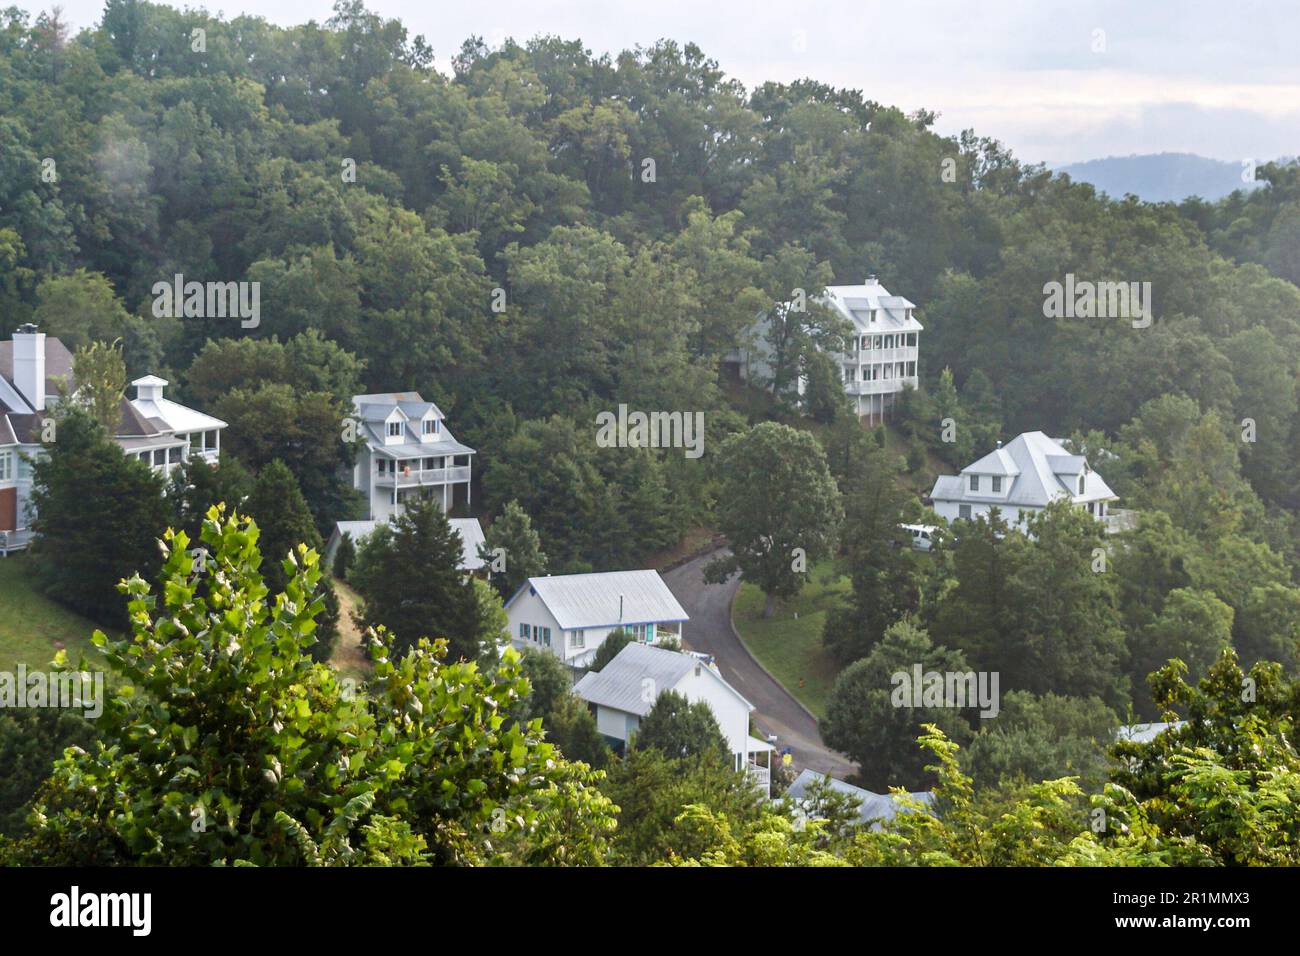 Tennessee Smoky Mountains Sevierville,Hidden Mountain Resort rental homes houses, Stock Photo